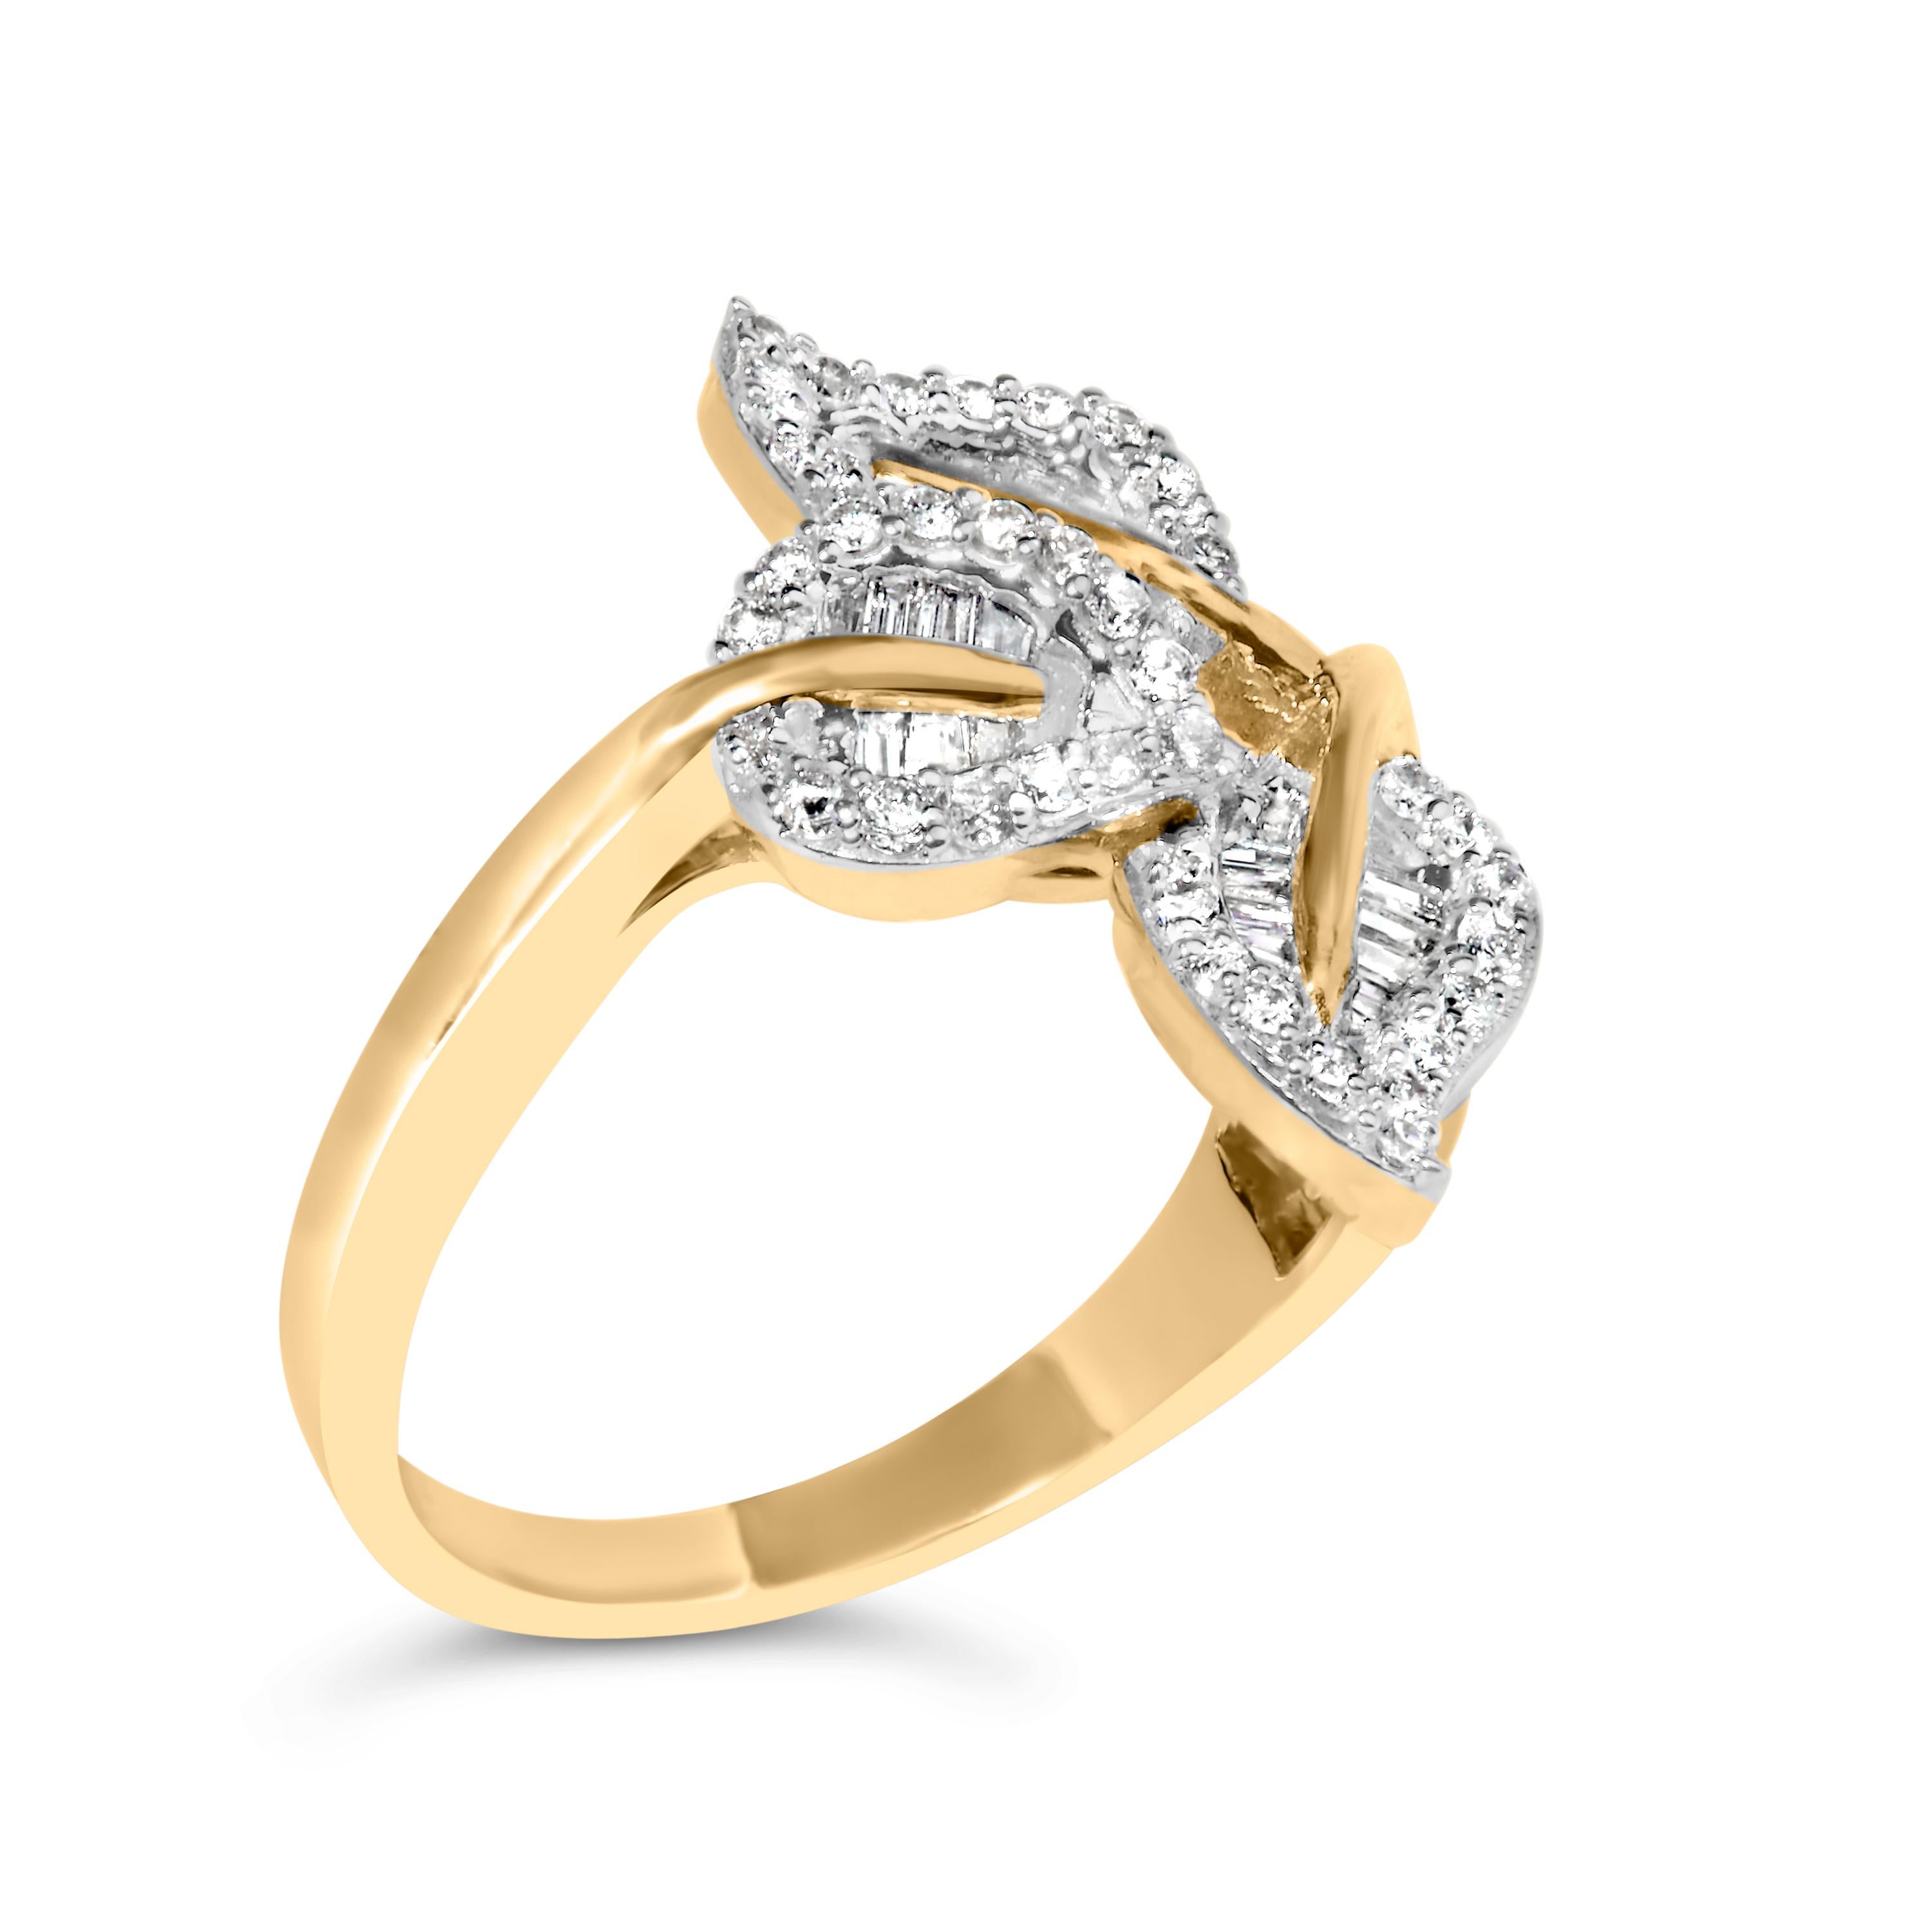 This stunning nature inspired ring design is perfect for everyday wear. Crafted from 10k yellow gold, this design features 3/8ct TDW of natural round and baguette diamonds. A warm yellow gold ring band holds as its centerpiece a trio of diamond